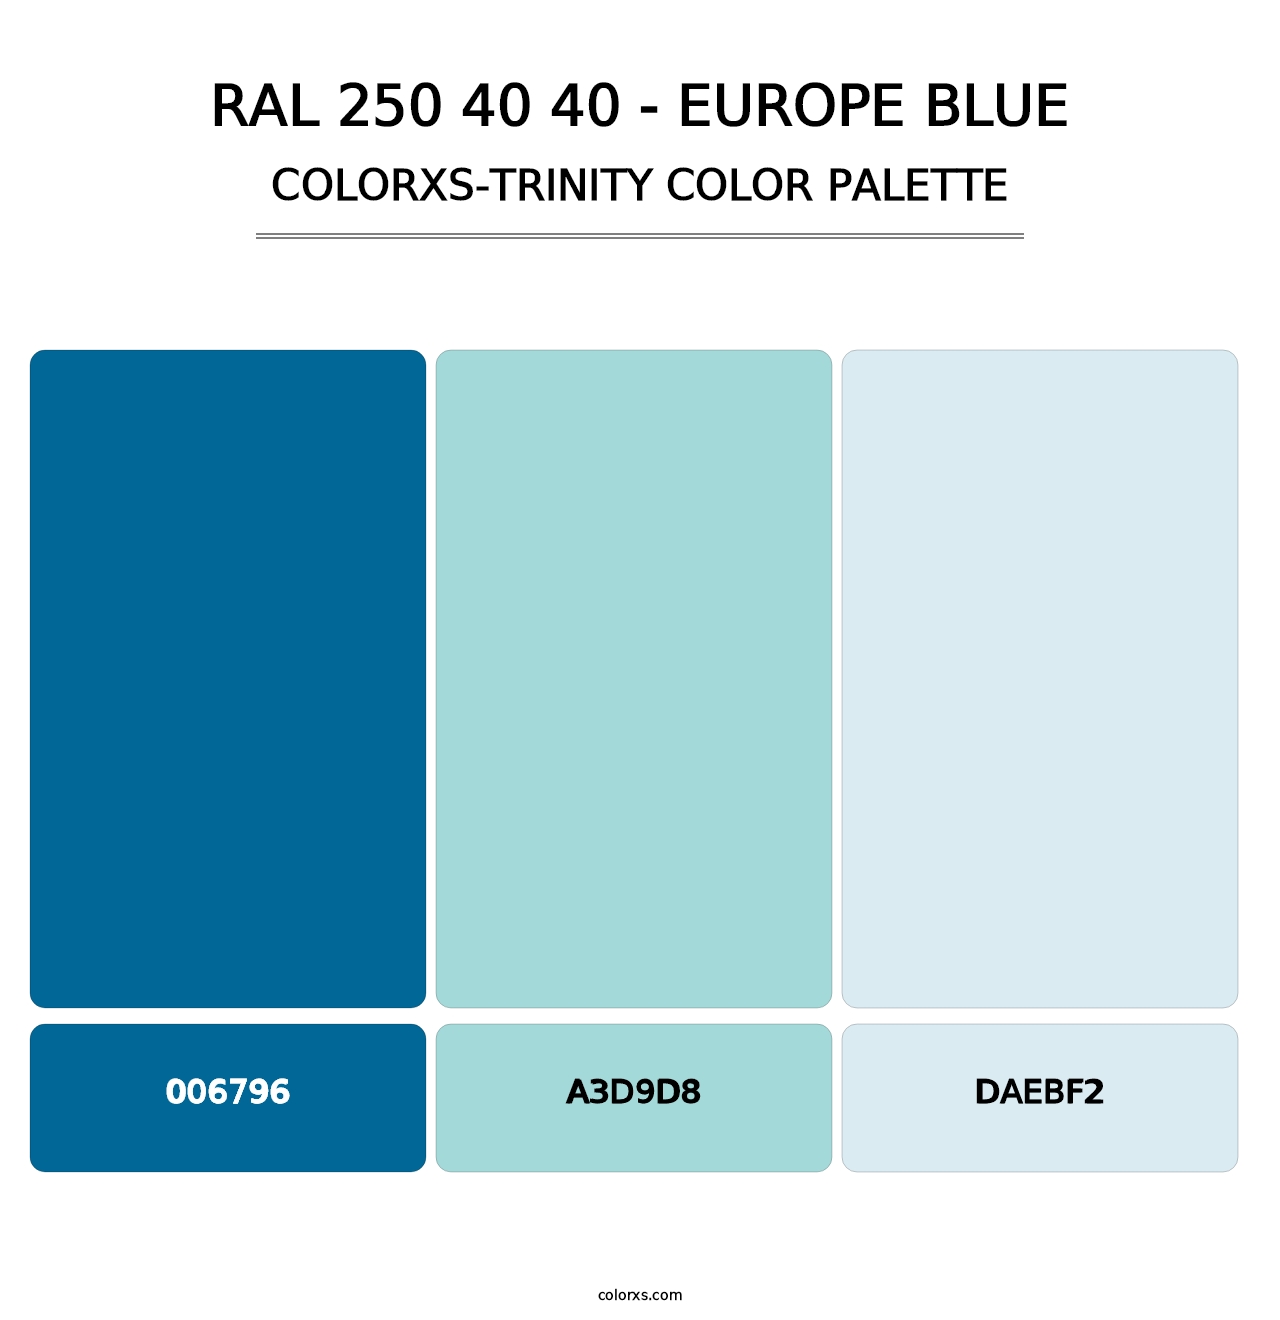 RAL 250 40 40 - Europe Blue - Colorxs Trinity Palette